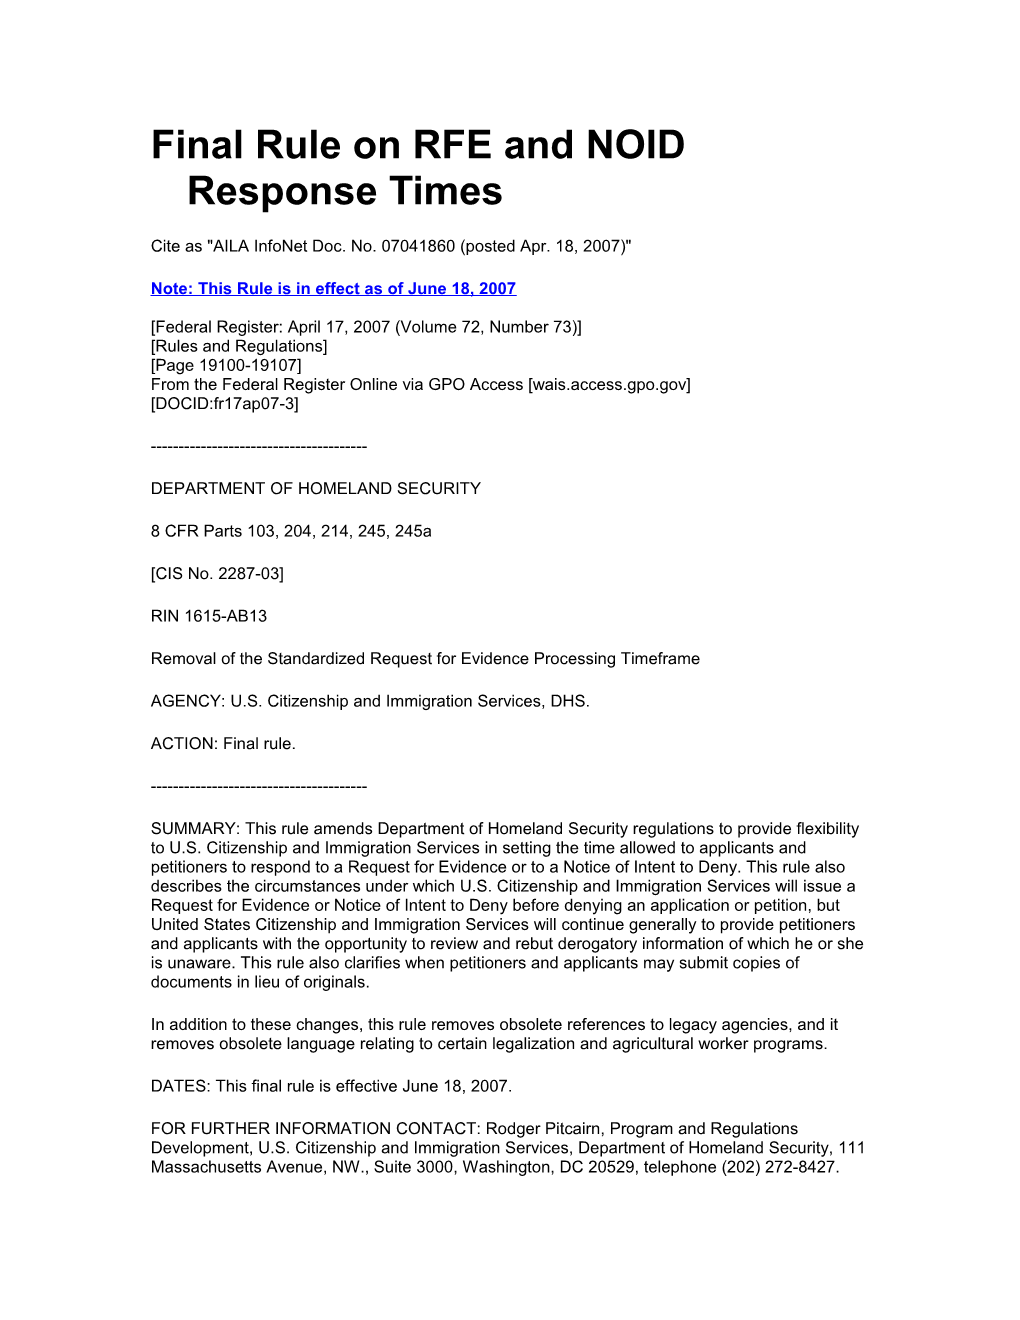 Final Rule on RFE and NOID Response Times